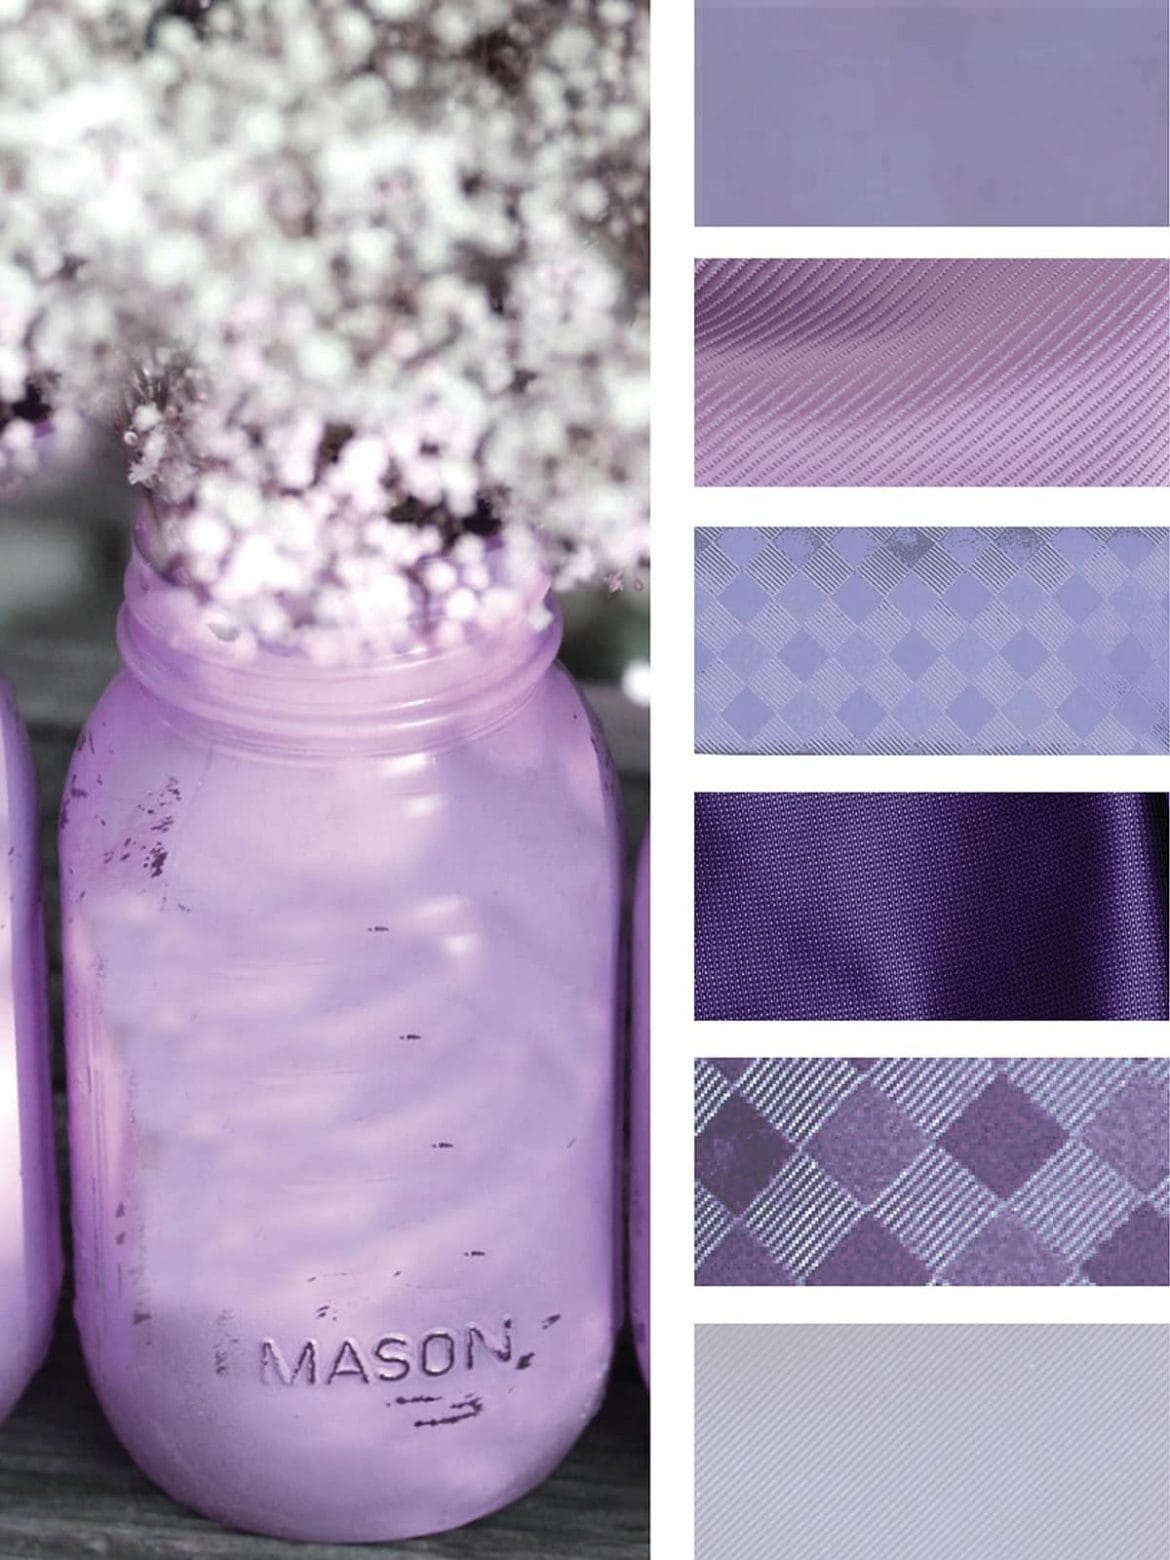 A stunning collage of purple mason jars with flowers gracefully arranged inside.